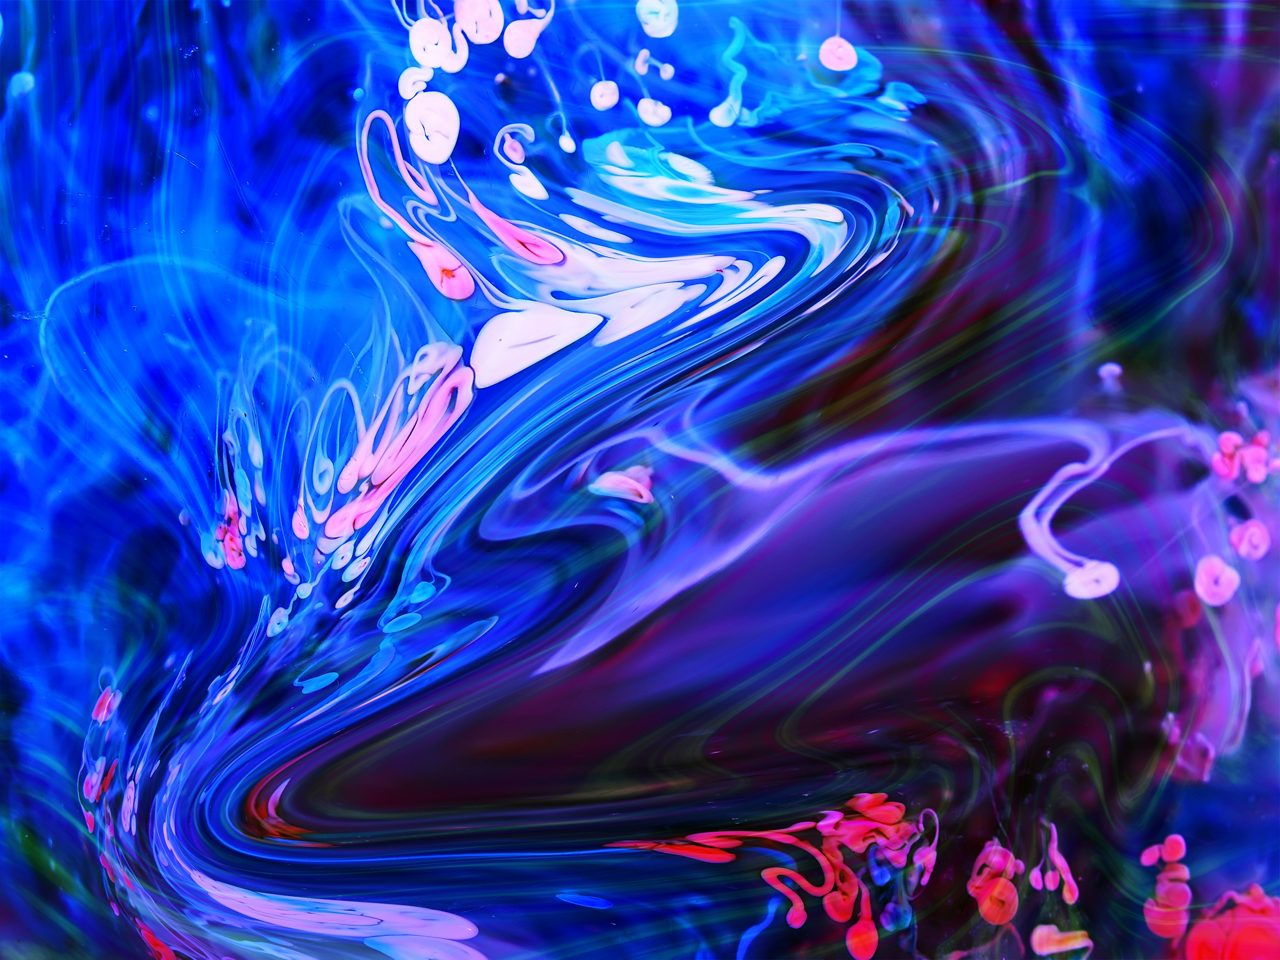 Swirled blue, pink and purple paint background